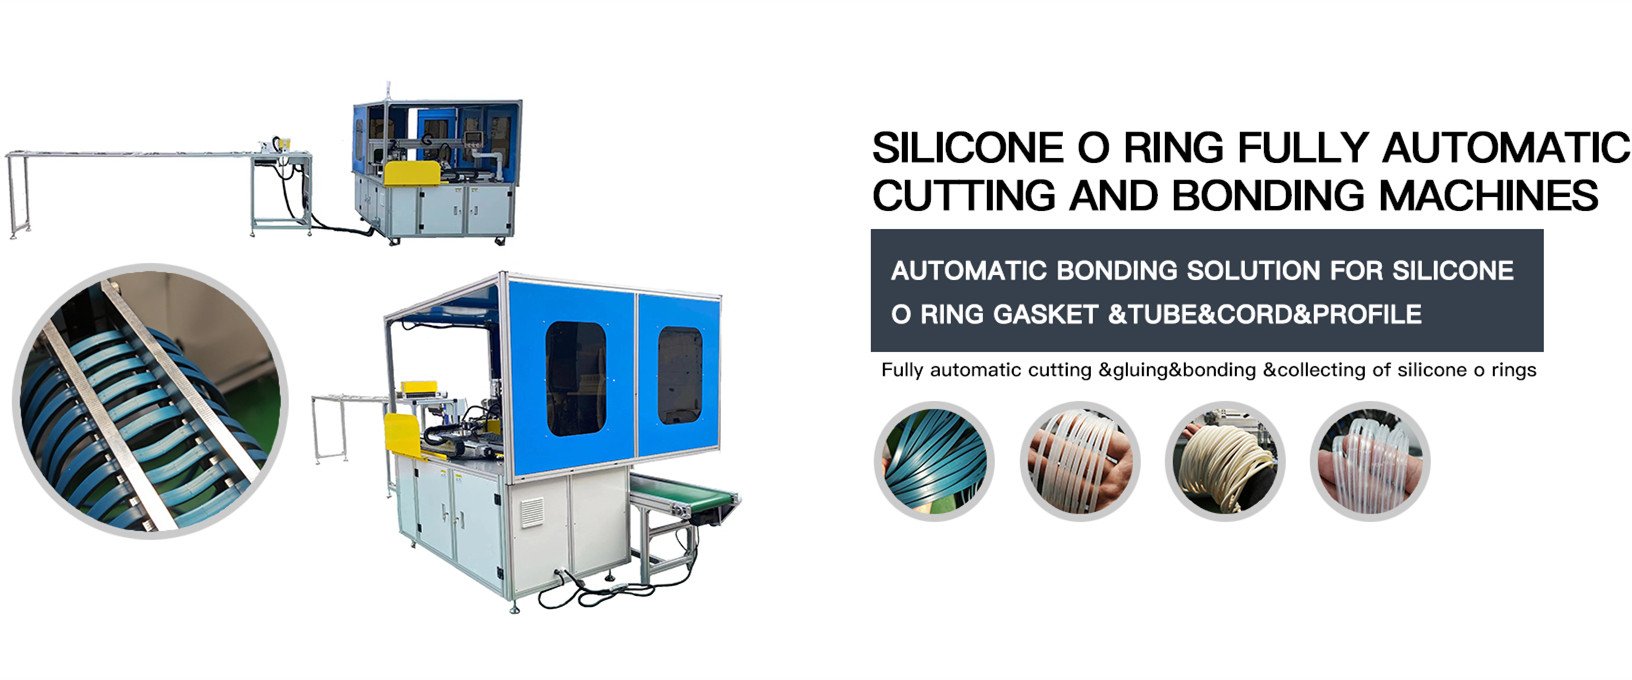 Silicone o ring fully automatic cutting and bonding machines